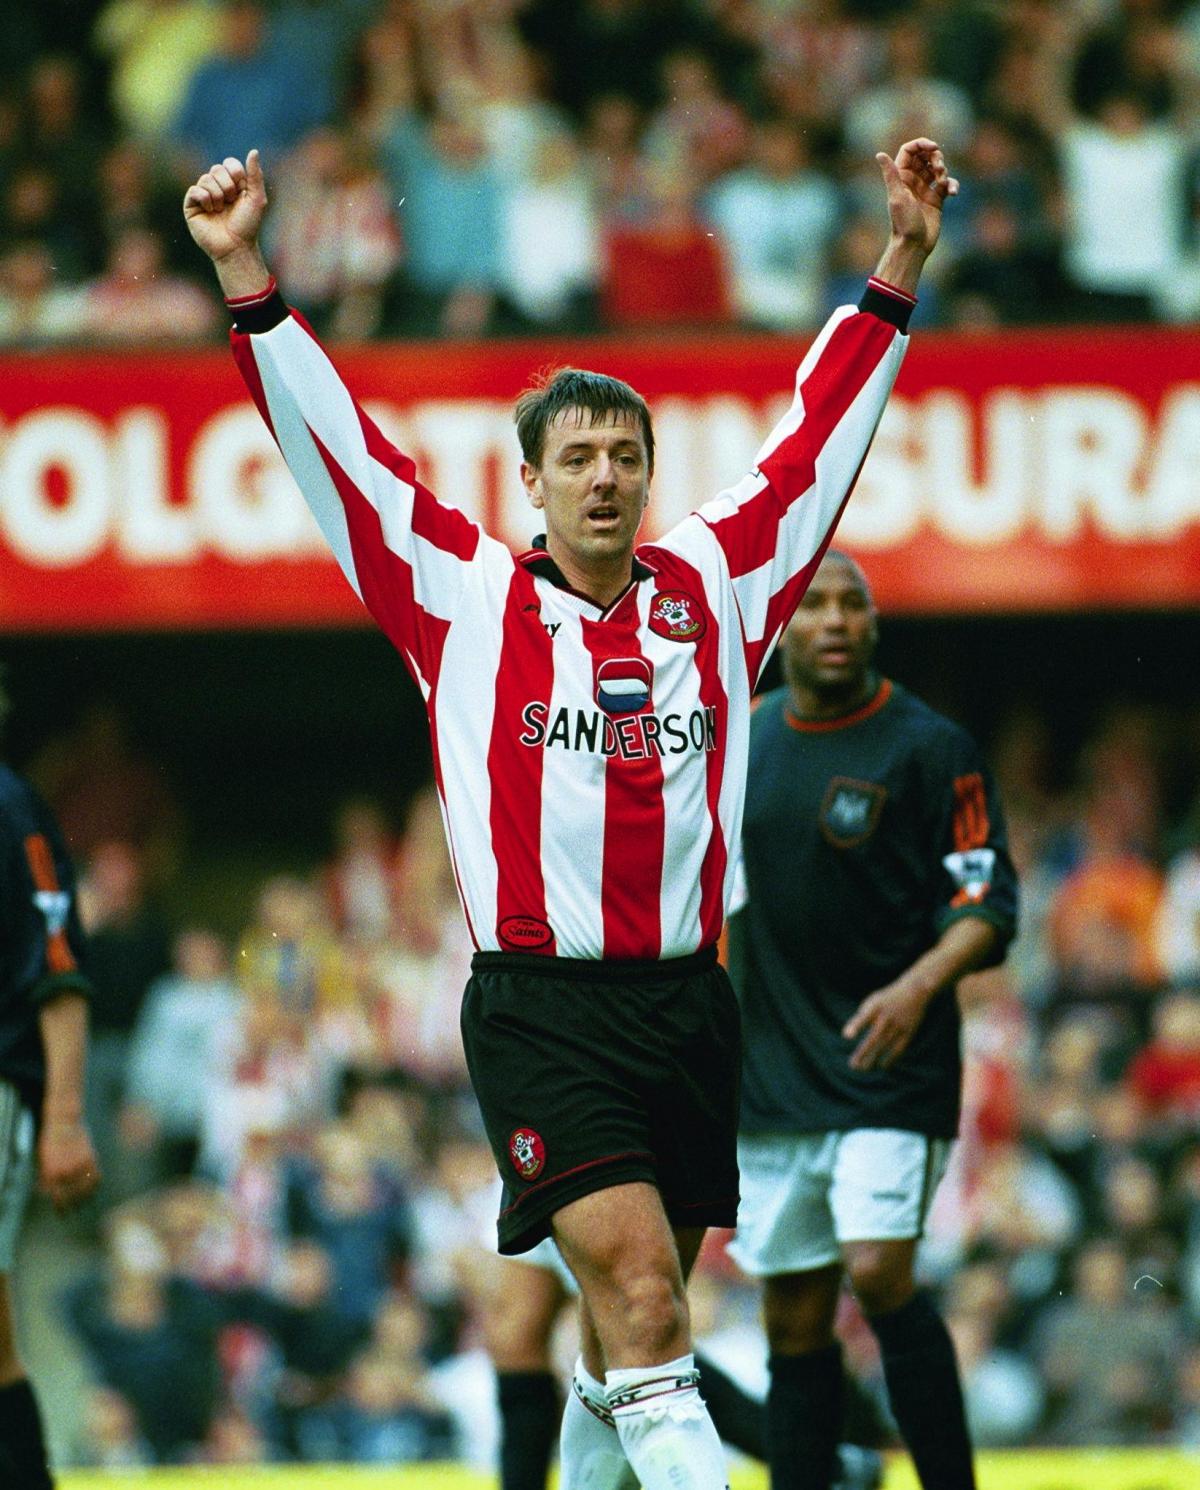 Saints legend Matt Le Tissier: "If you haven't anything difficult to do today, then what's the point in getting up! Meet things head on, even the tough things"